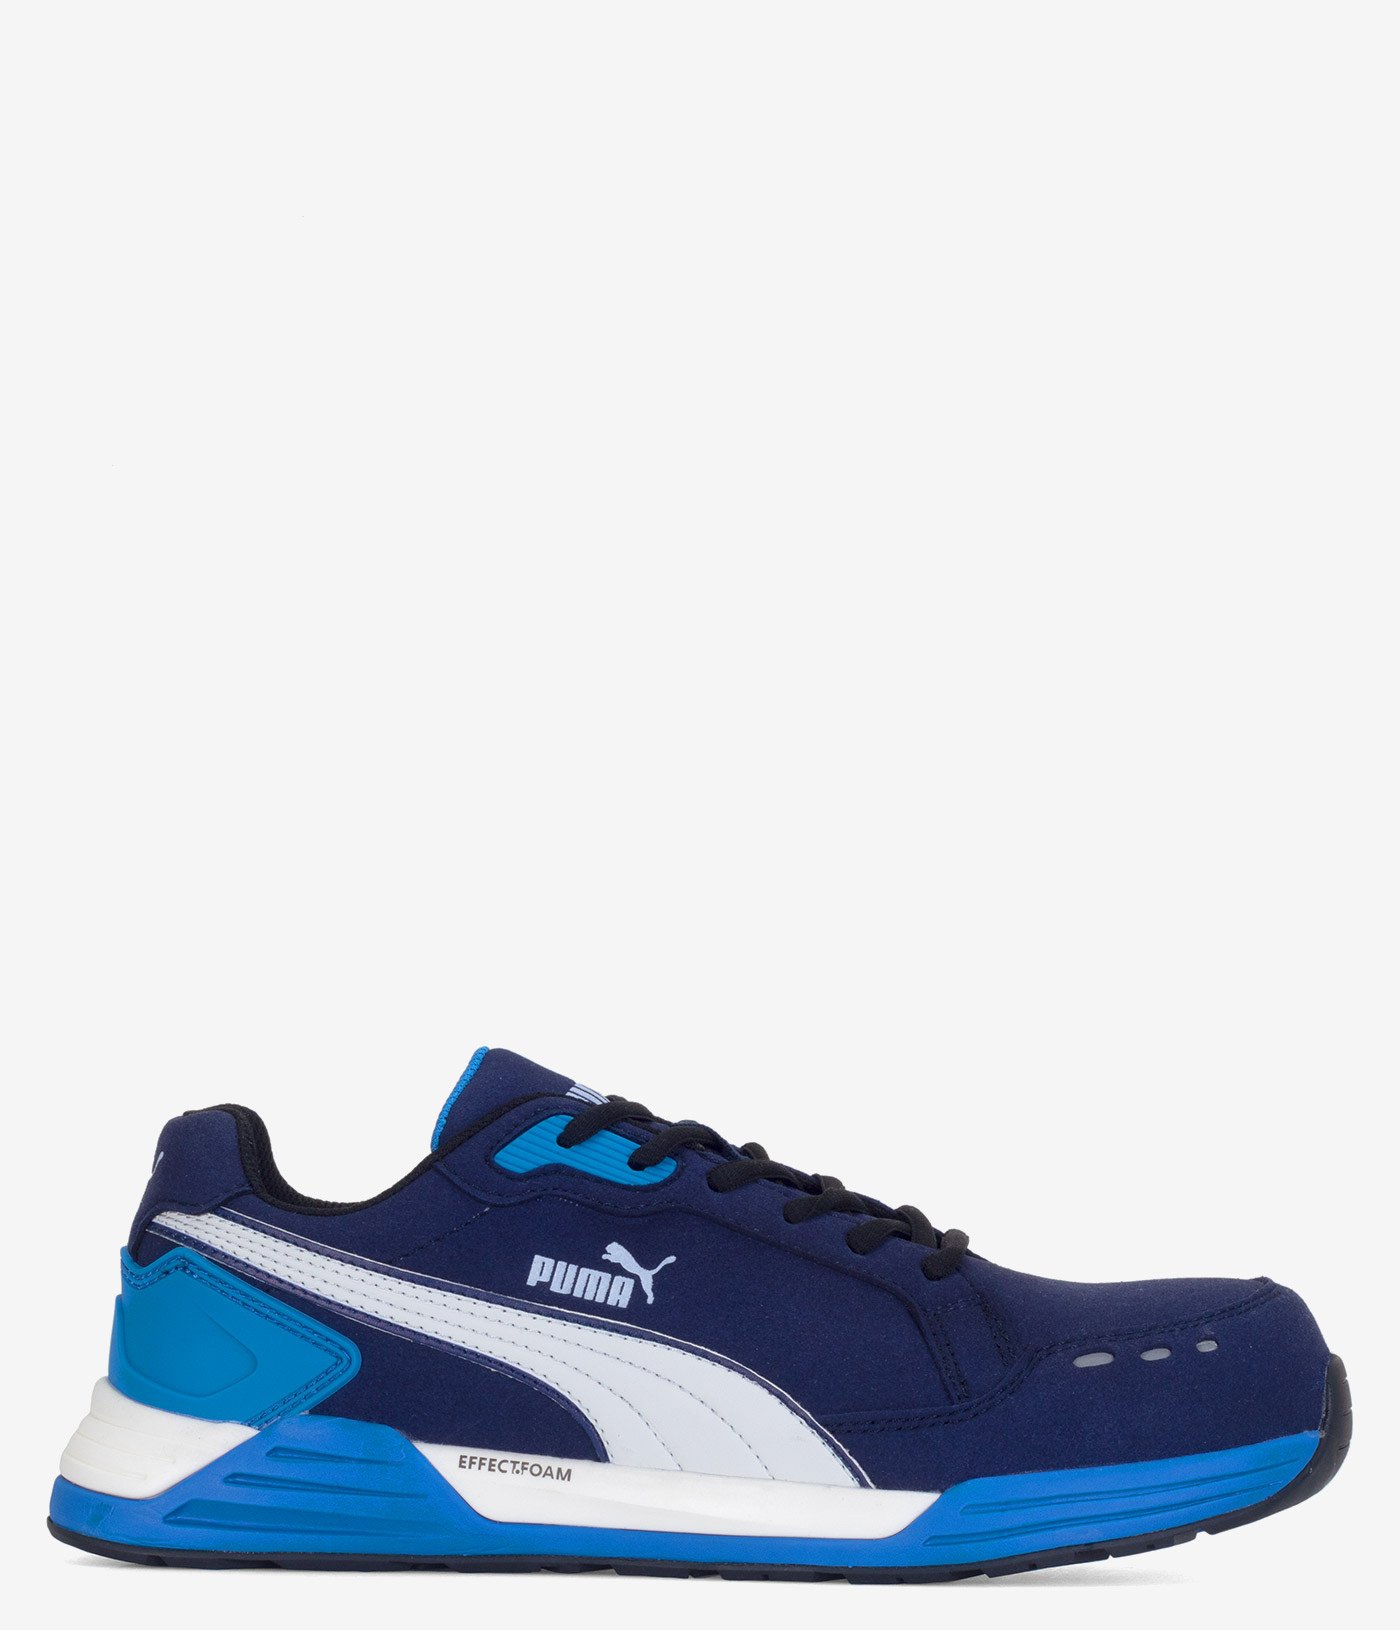 PUMA Safety Airtwist Low Composite Toe Work Shoe